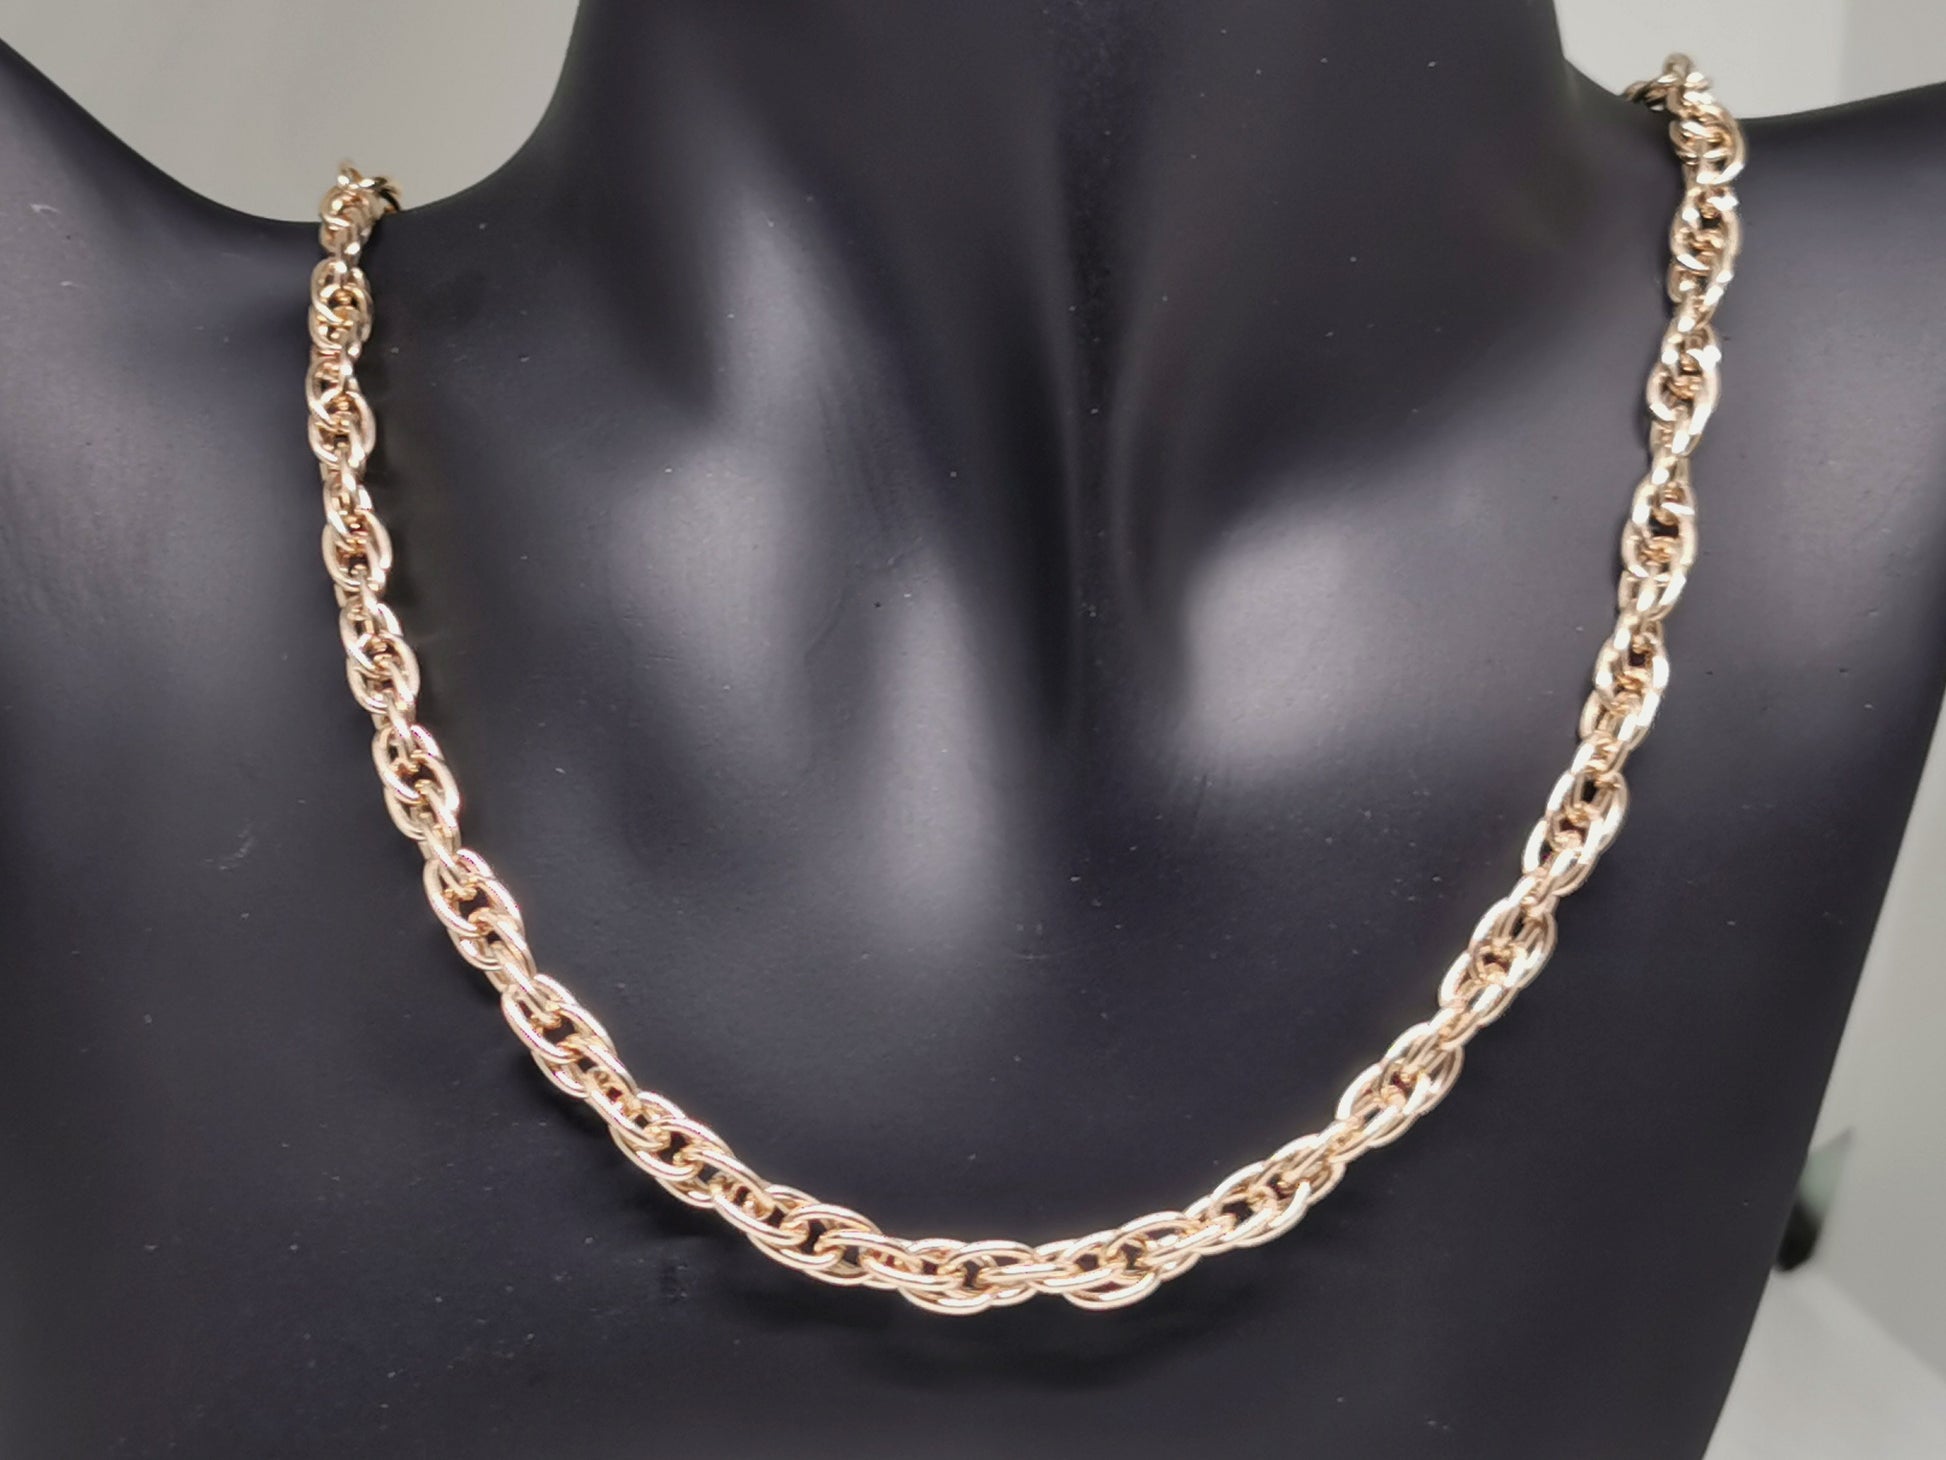 Large Antique Bronze 5.6mm Rope Chain made to order, bronze rope chain, bronze chain, rope chain, necklace chain, bronze necklace chain, 5.6mm chain, 5.6mm bronze chain, bronze chain jewelry, bronze chain jewellery, chain jewelry chain jewellery, bronze jewellery, bronze jewelry, 5.6mm chain necklace, 5.6mm bronze chain necklace